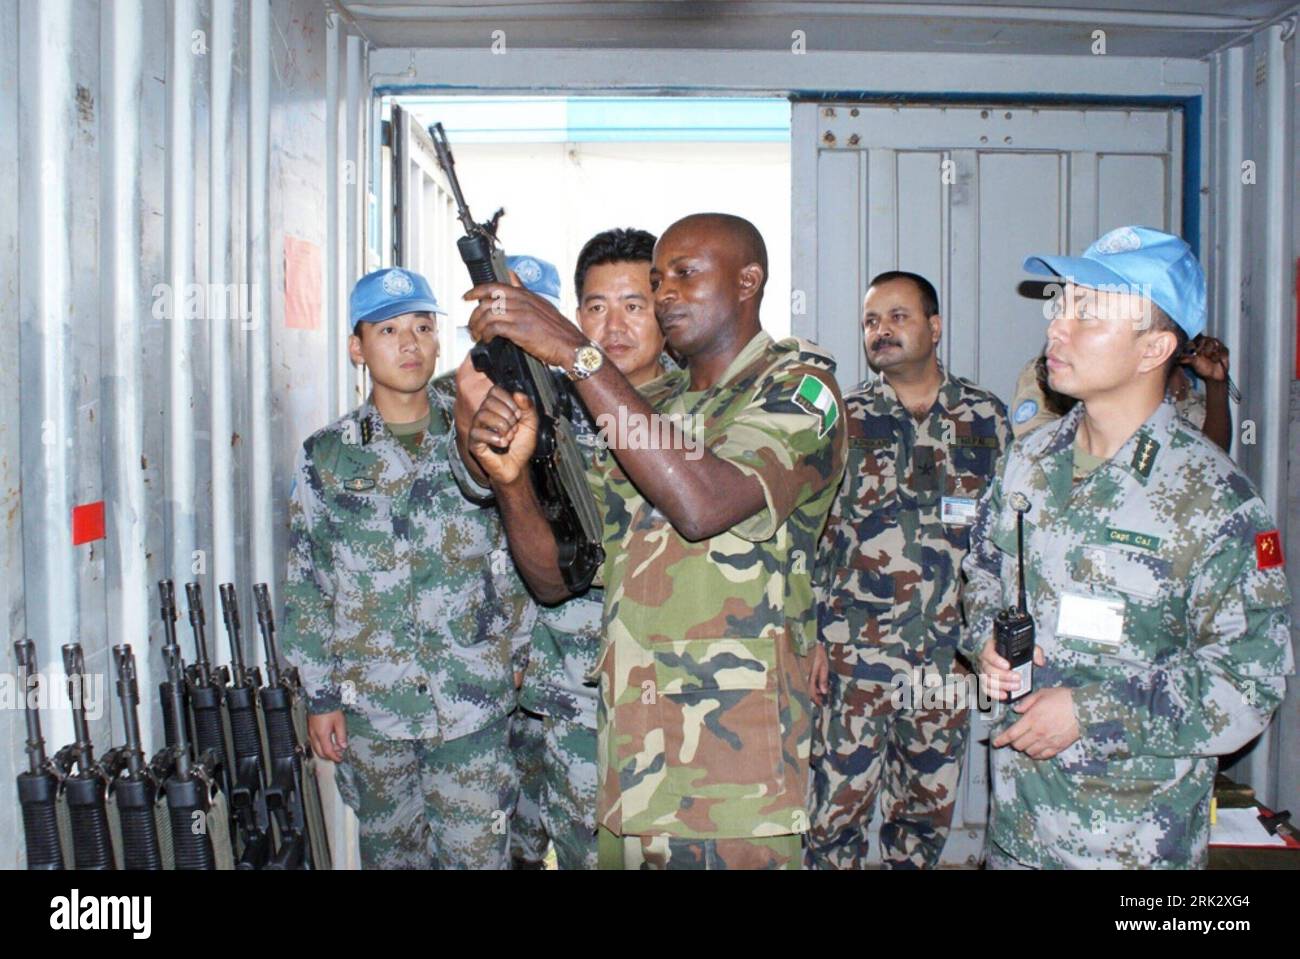 Bildnummer: 53263910  Datum: 14.08.2009  Copyright: imago/Xinhua (090814) -- BUKAVU, Aug. 14, 2009 (Xinhua) -- UN officials check the arms of Chinese peacekeepers for the UN peacekeeping operation in the Democratic Republic of Congo (DRC) at the base of the unit in the DRC, on Aug. 13, 2009. The UN officials confirmed the amount and quality of medical equipment to insure the unit can complete the medical missions in the roily area on Thursday. This is the first inspection by the UN since the 10th Chinese peace keeping force arrived in the DRC.             (Xinhua/Hu Shiqiao)   (jl) (2)DRC-CHIN Stock Photo